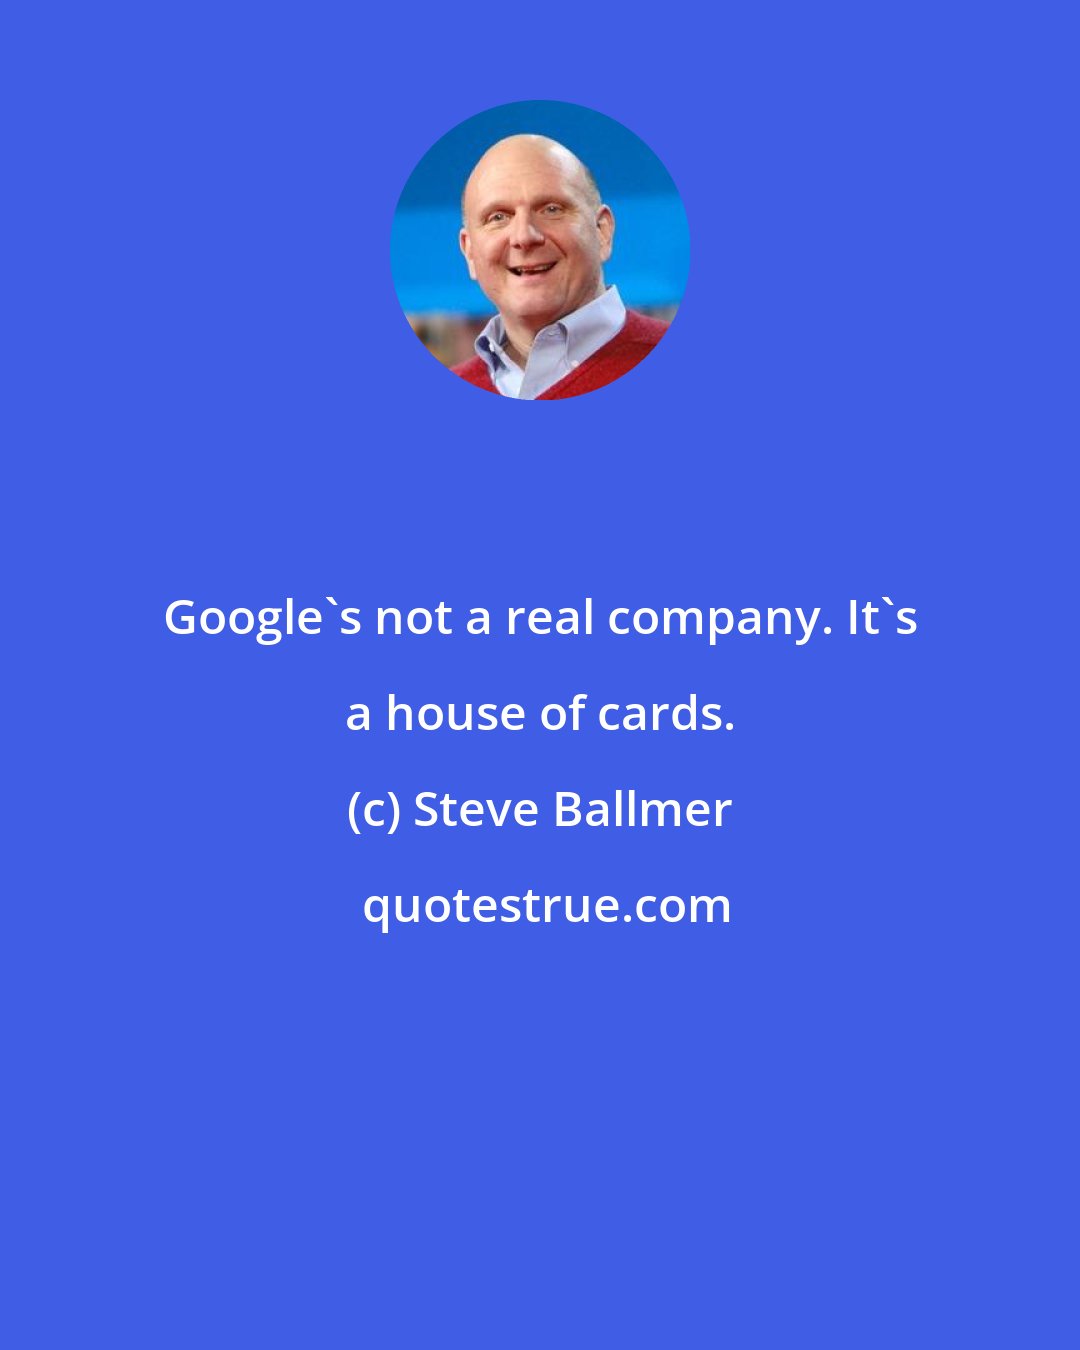 Steve Ballmer: Google's not a real company. It's a house of cards.